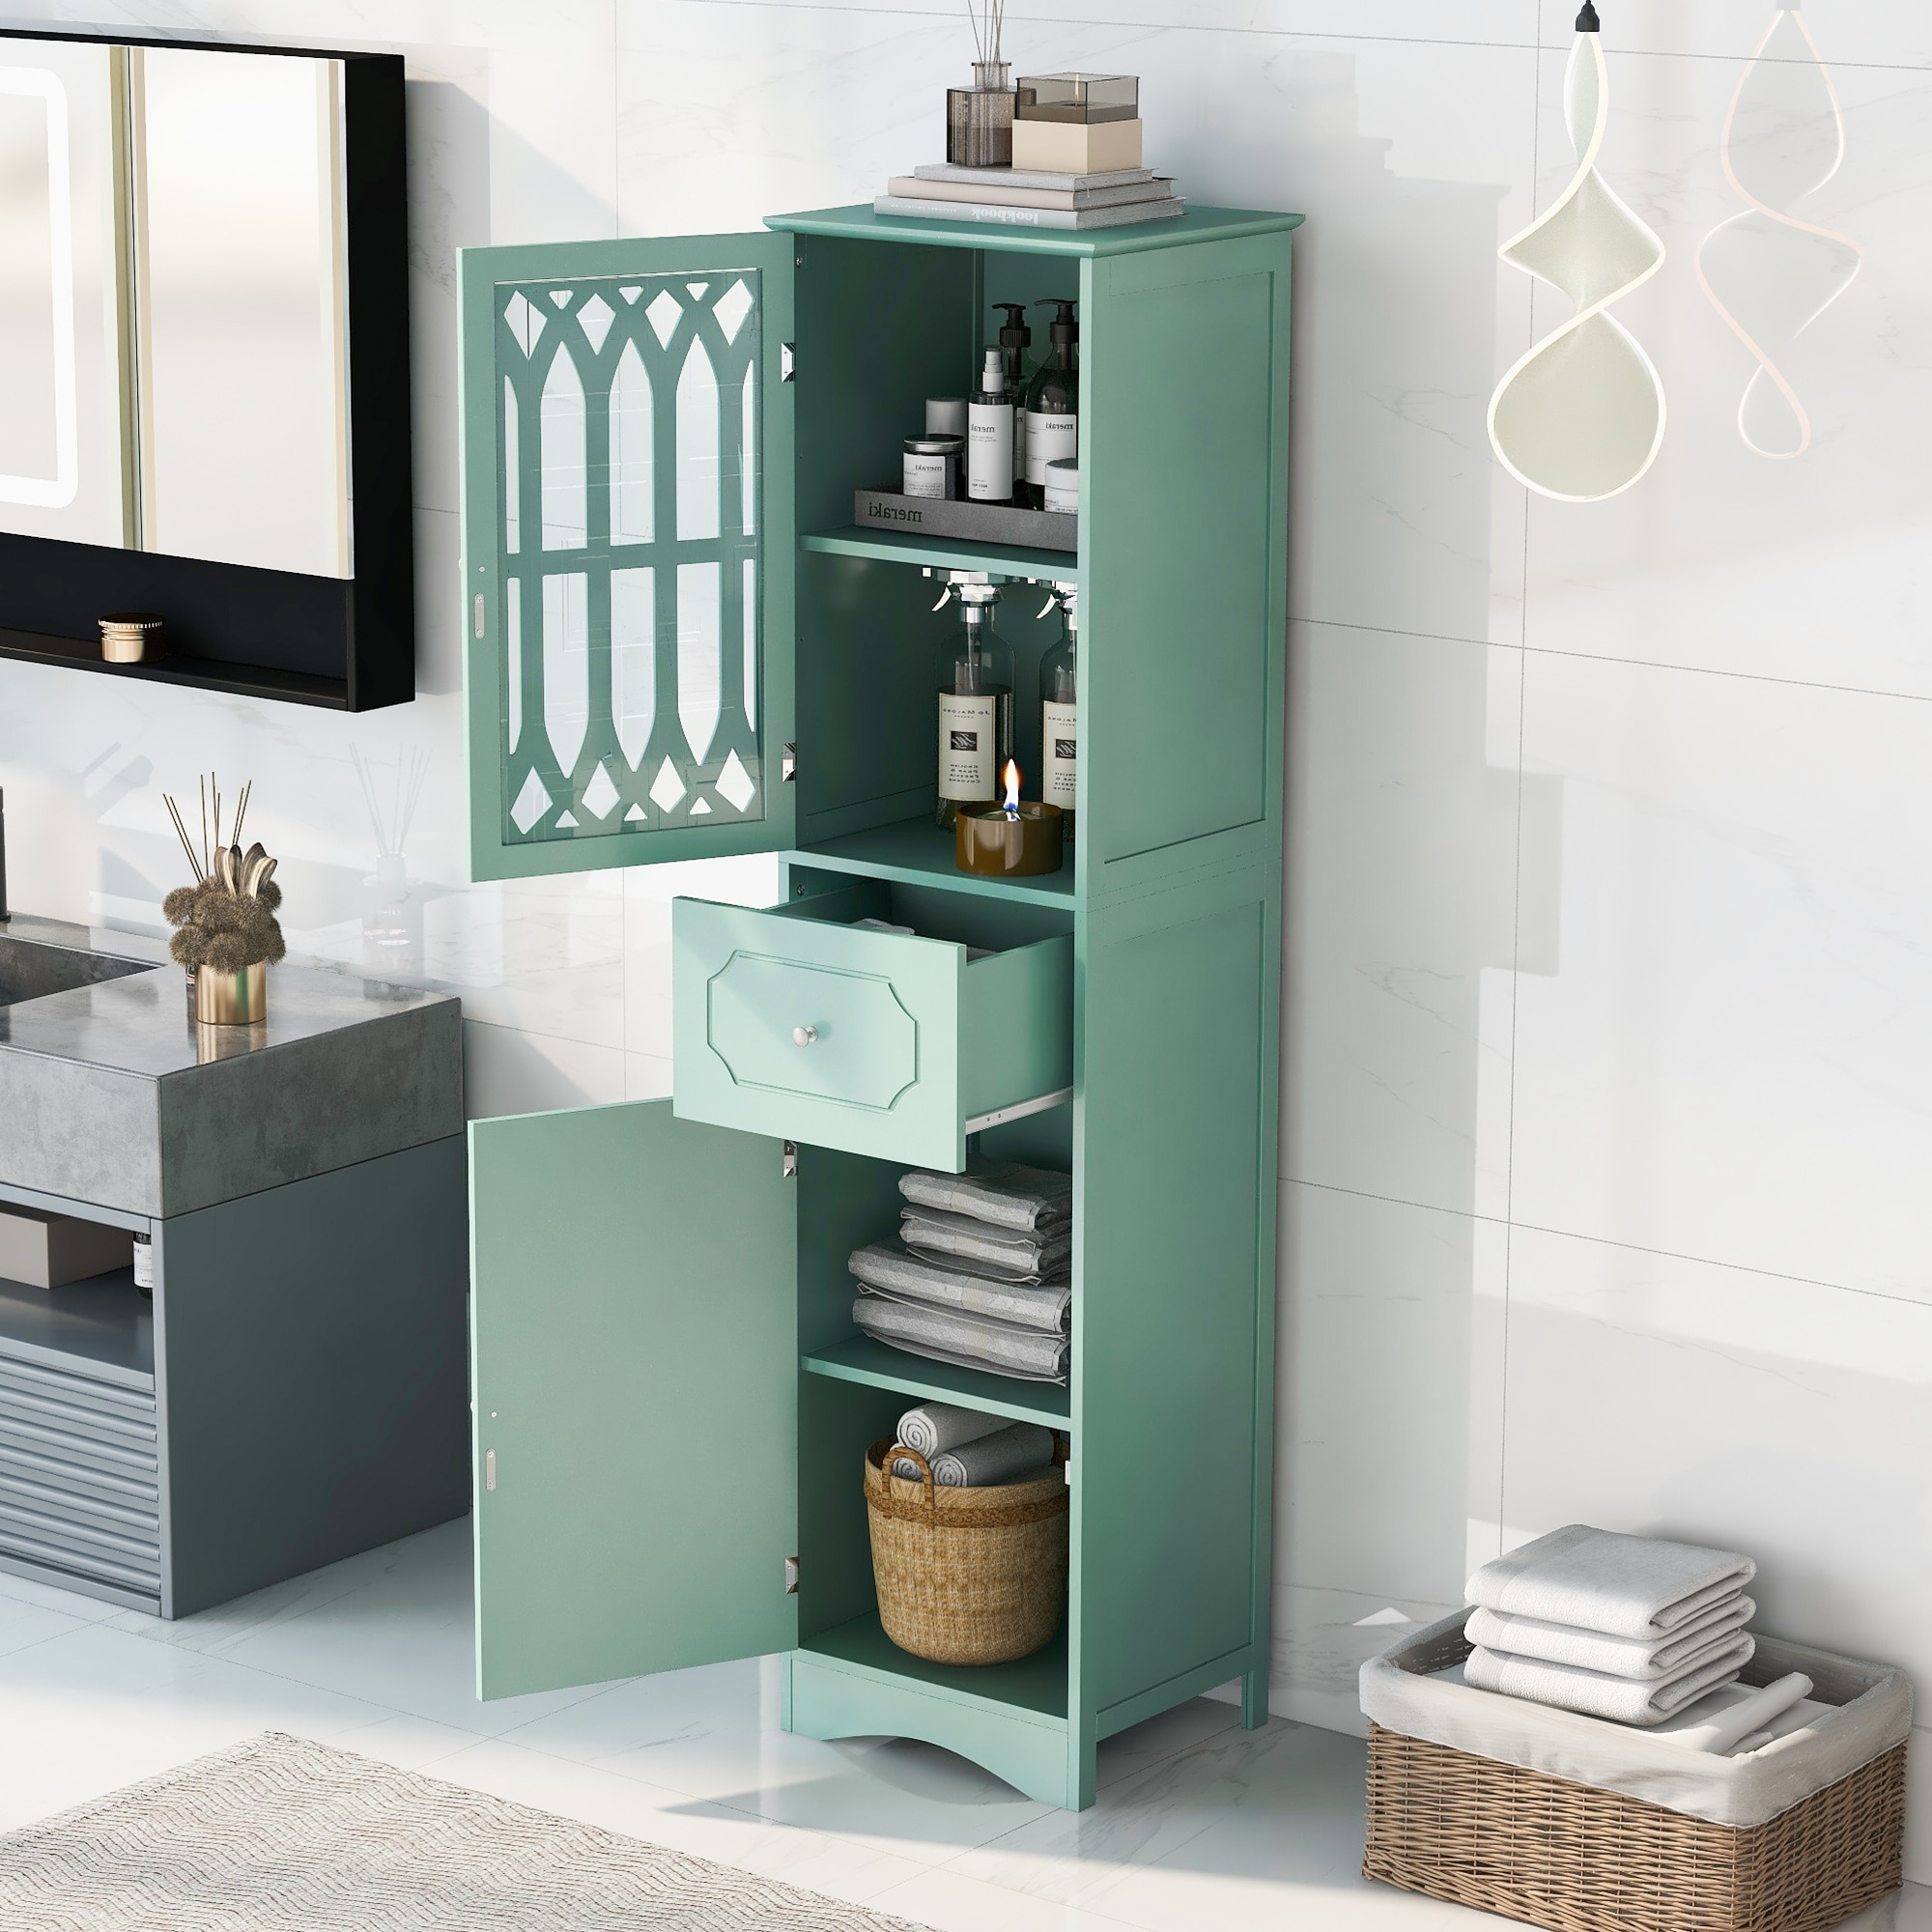 https://ak1.ostkcdn.com/images/products/is/images/direct/269b1aefa50e50e1af2dbcd6f9cf9d389f7507d4/Tall-Bathroom-Cabinet%2C-Freestanding-Storage-Cabinet-with-Drawer-and-Doors%2C-MDF-Board%2C-Adjustable-Shelf.jpg